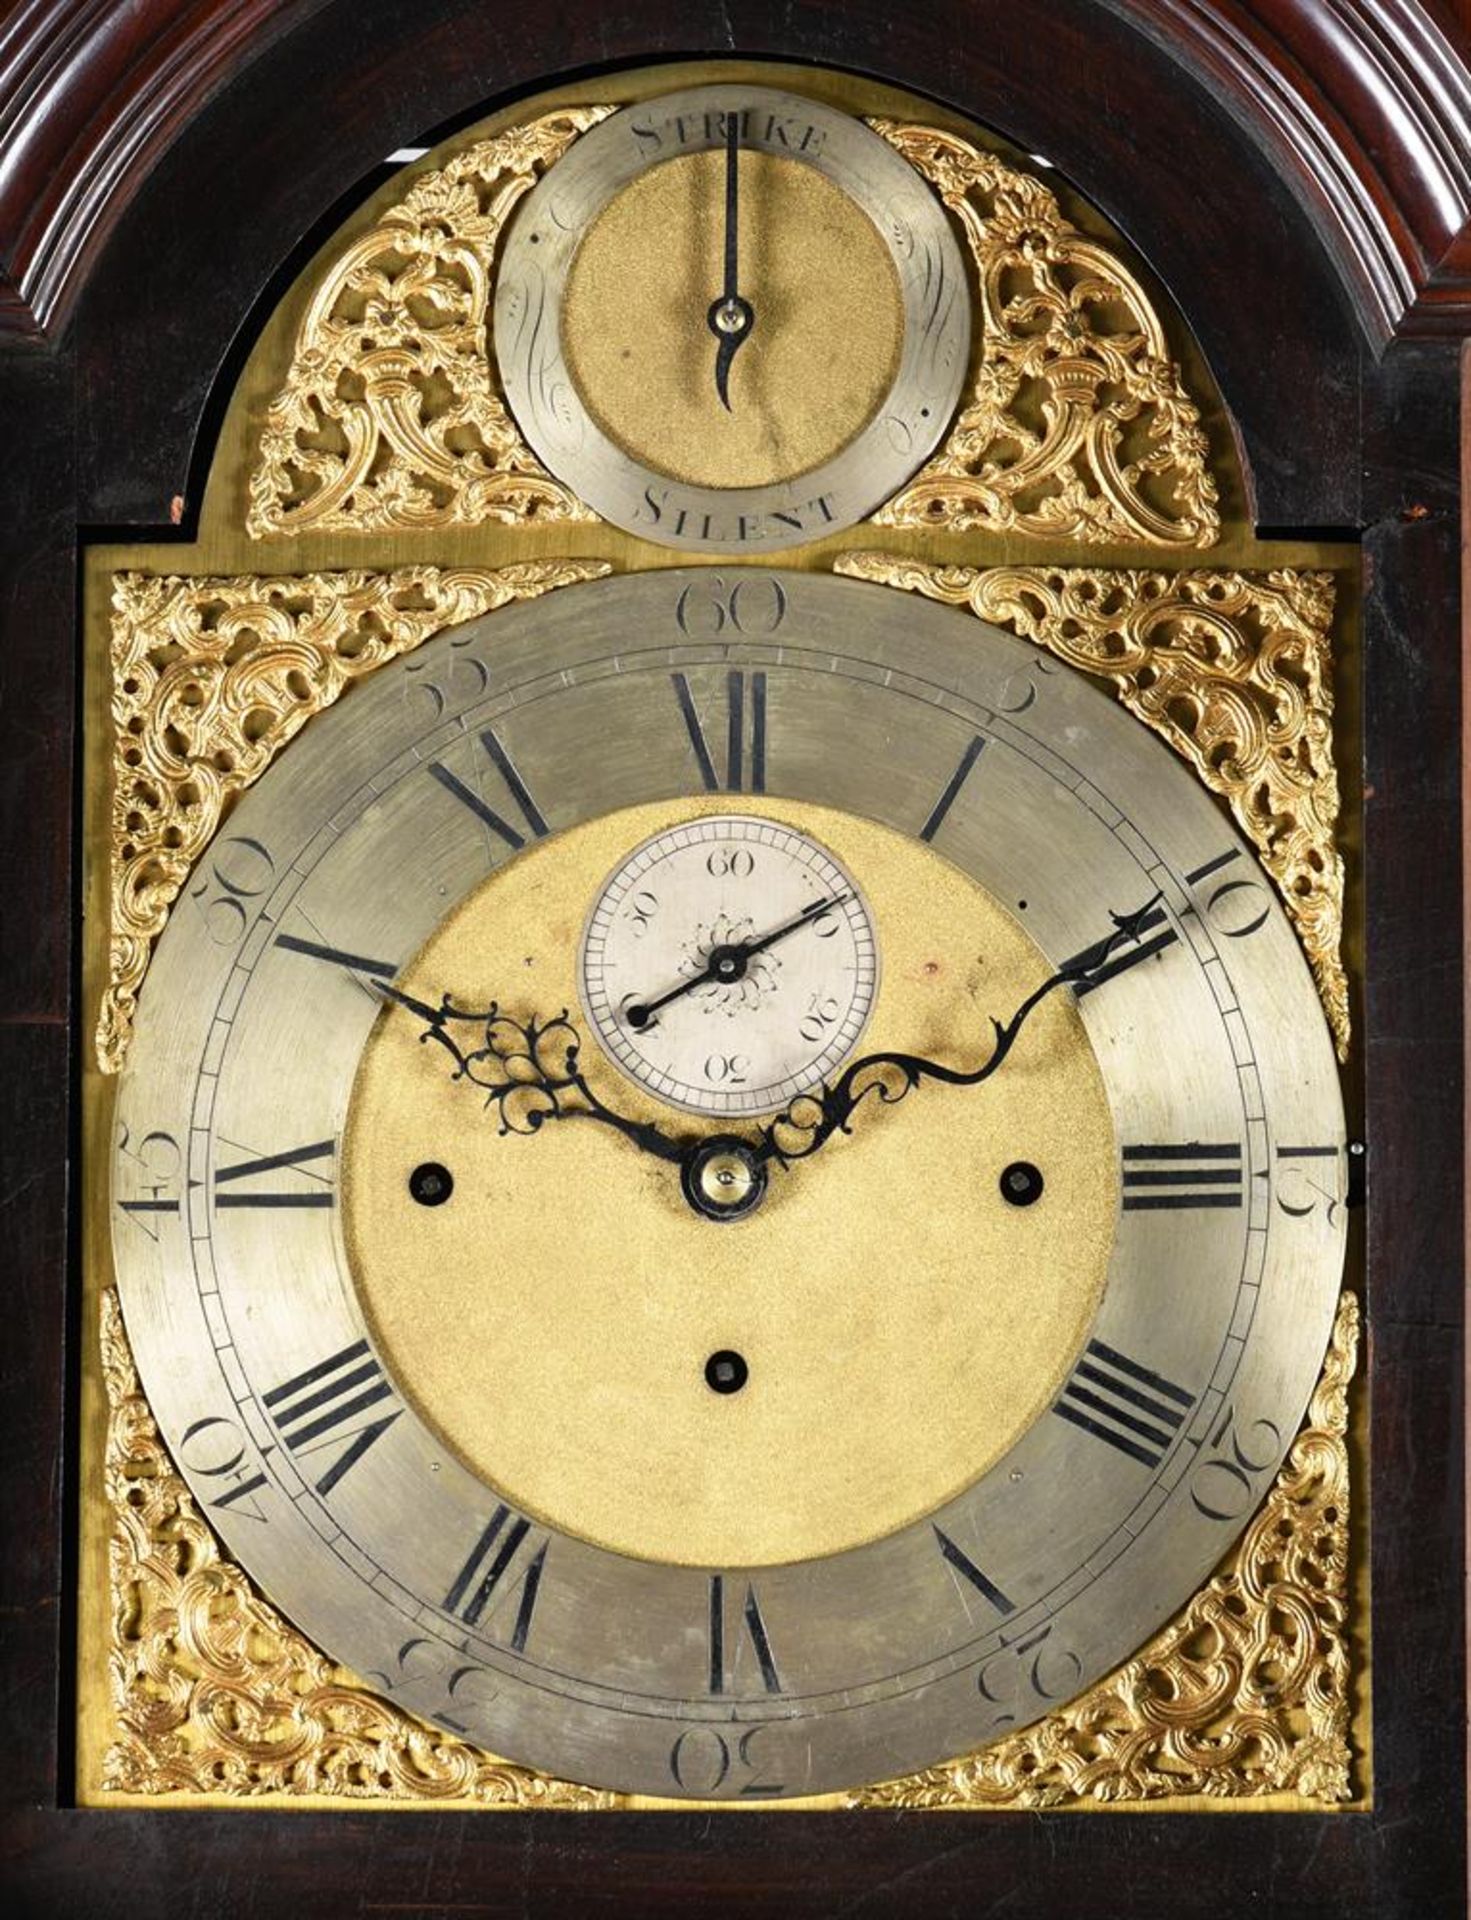 A LATE VICTORIAN INLAID MAHOGANY QUARTER-CHIMING EIGHT-DAY LONGCASE CLOCK - Image 2 of 3